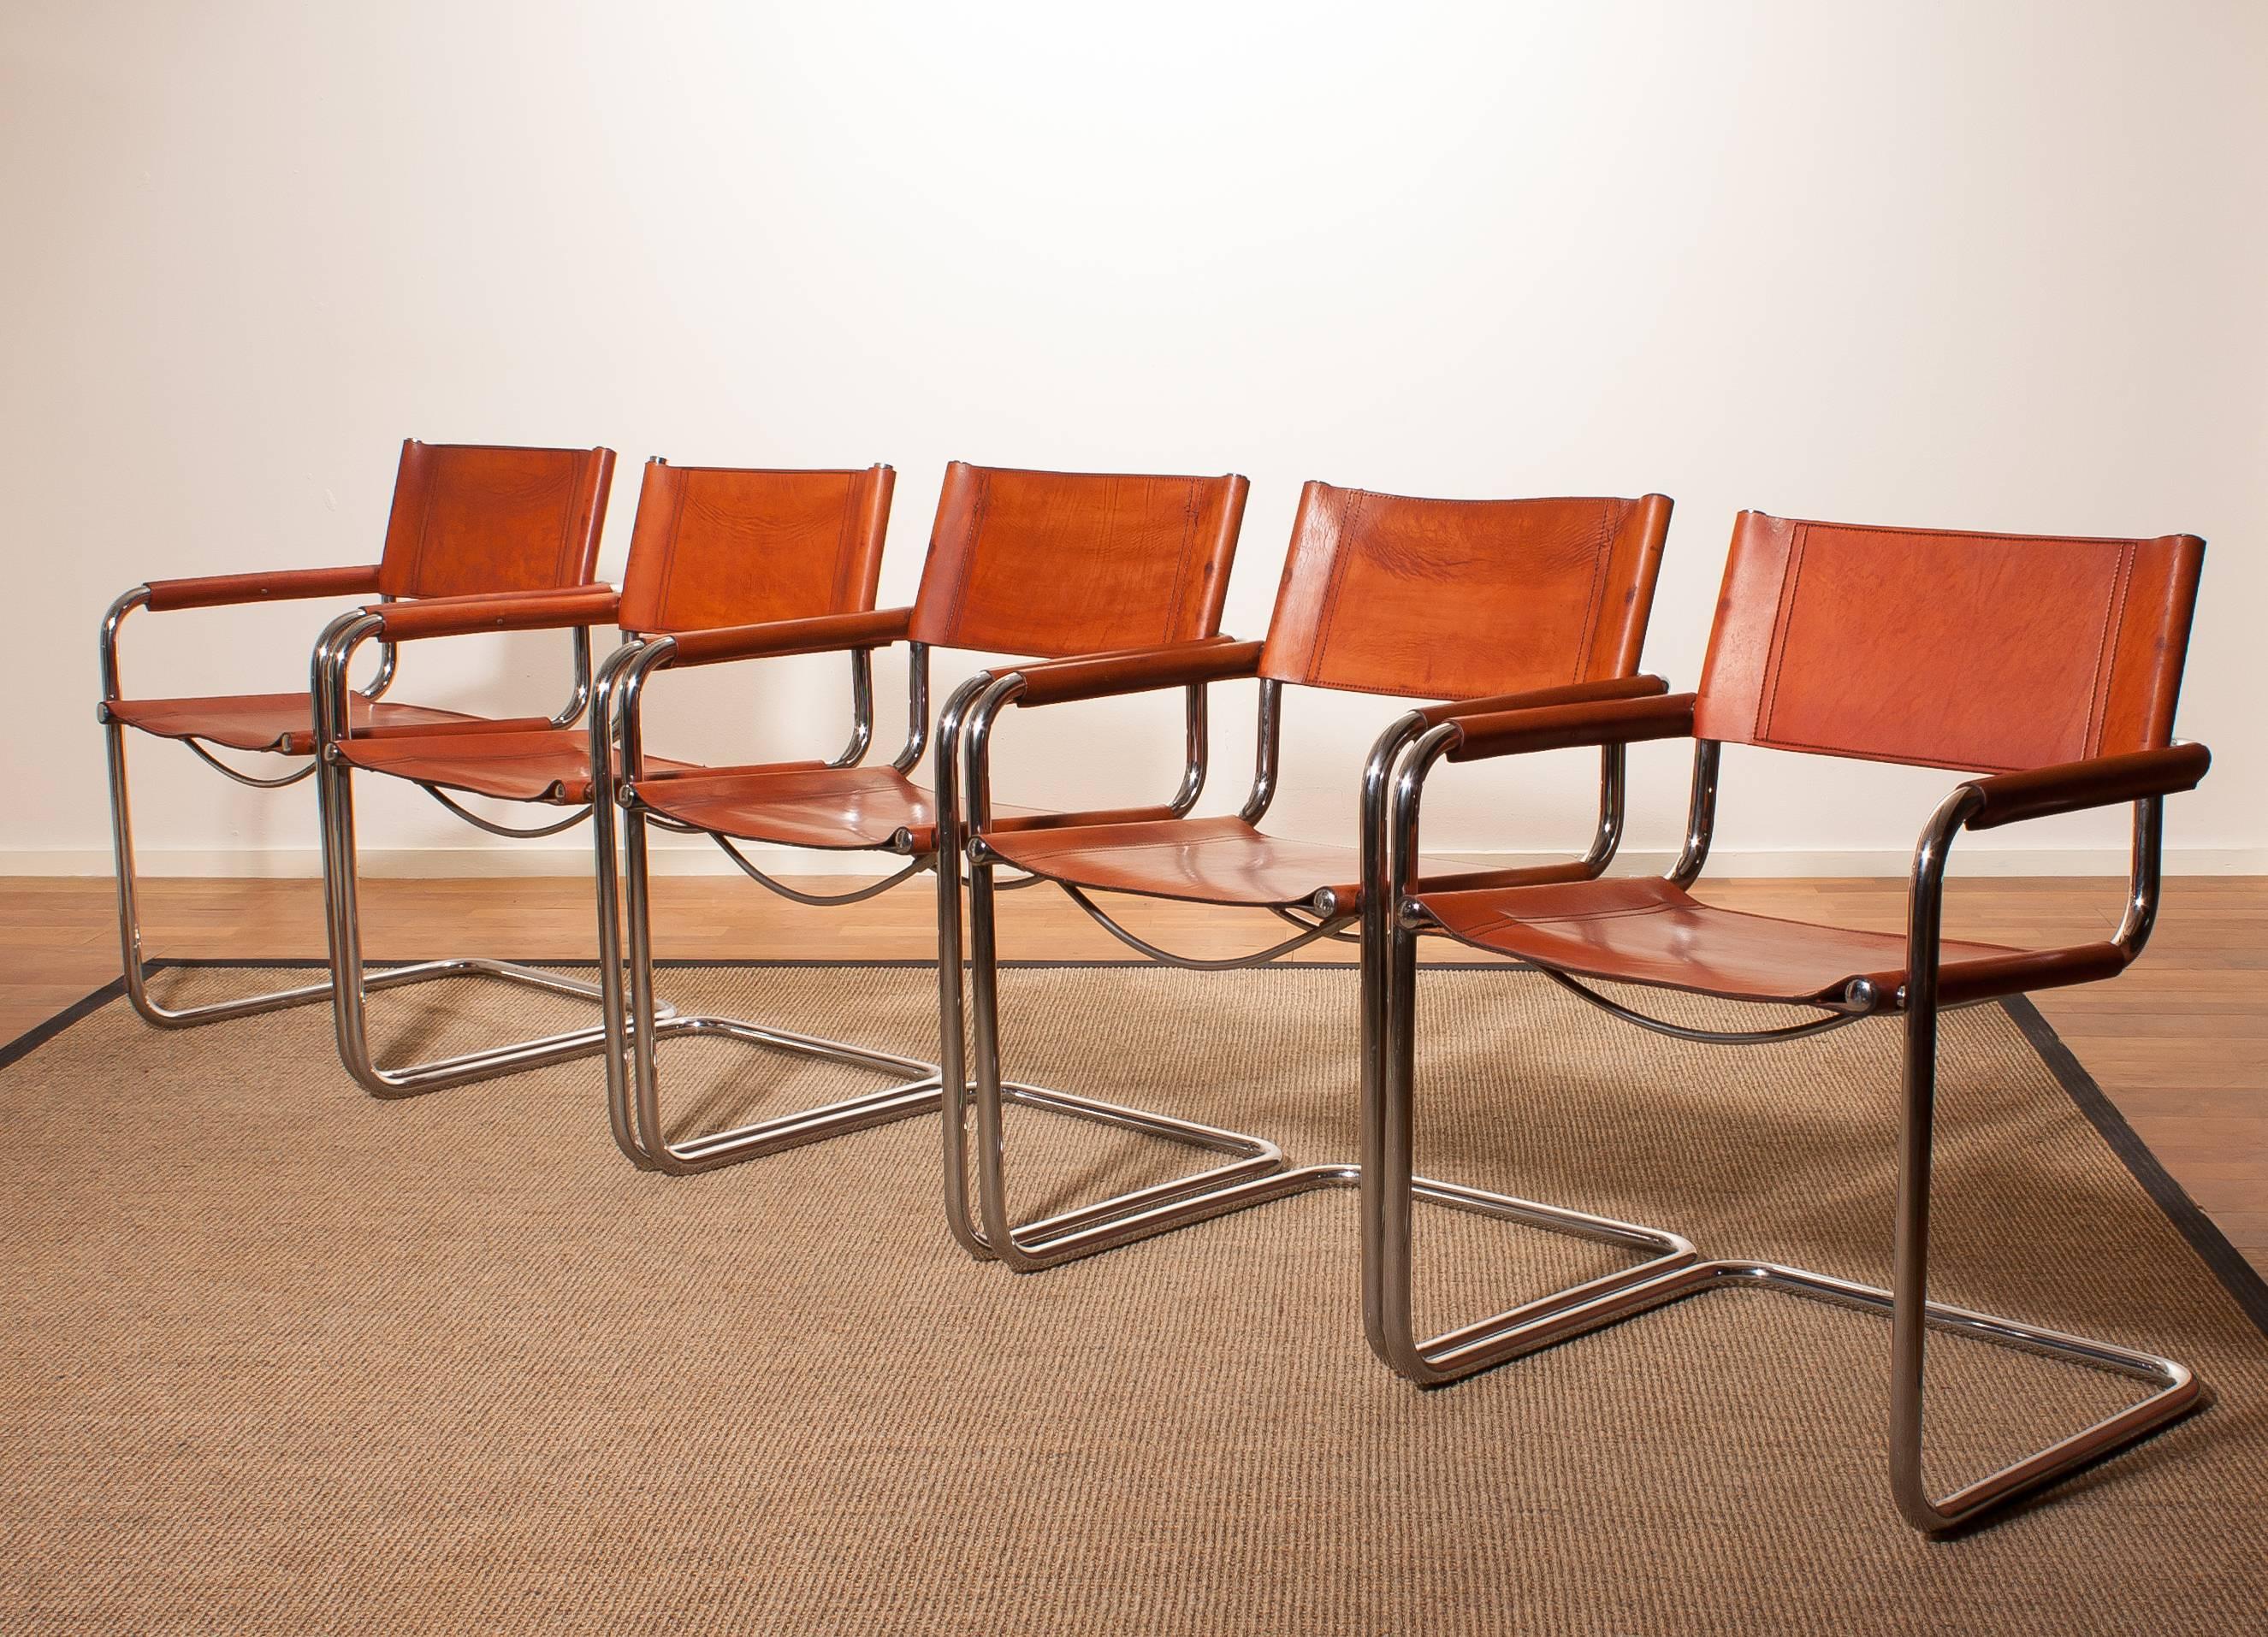 A set of five fine Italian dining chairs designed by Mart Stam for Jox Interni, Italy.
The chairs have a tubular chrome steel frame and the seat as well as the backrest and armrests are made of sturdy cognac leather.
The condition is in a nice